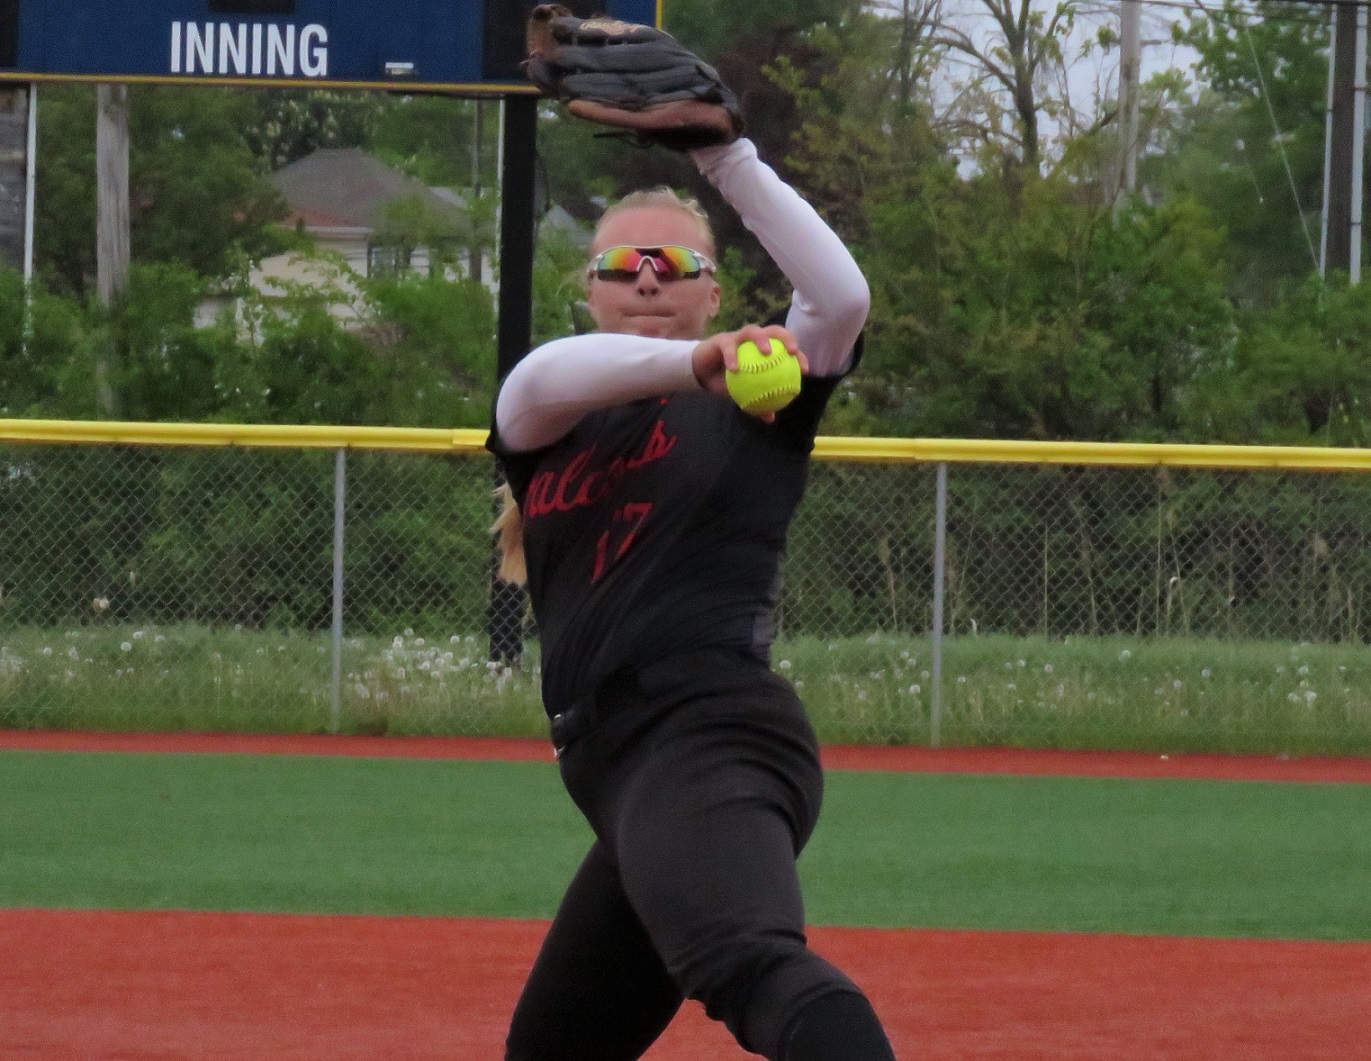 Mackenzie Quider makes a pitch from the circle Tuesday evening versus Hamburg. Quider threw a complete game with six strikeouts. (Photo by David Yarger)